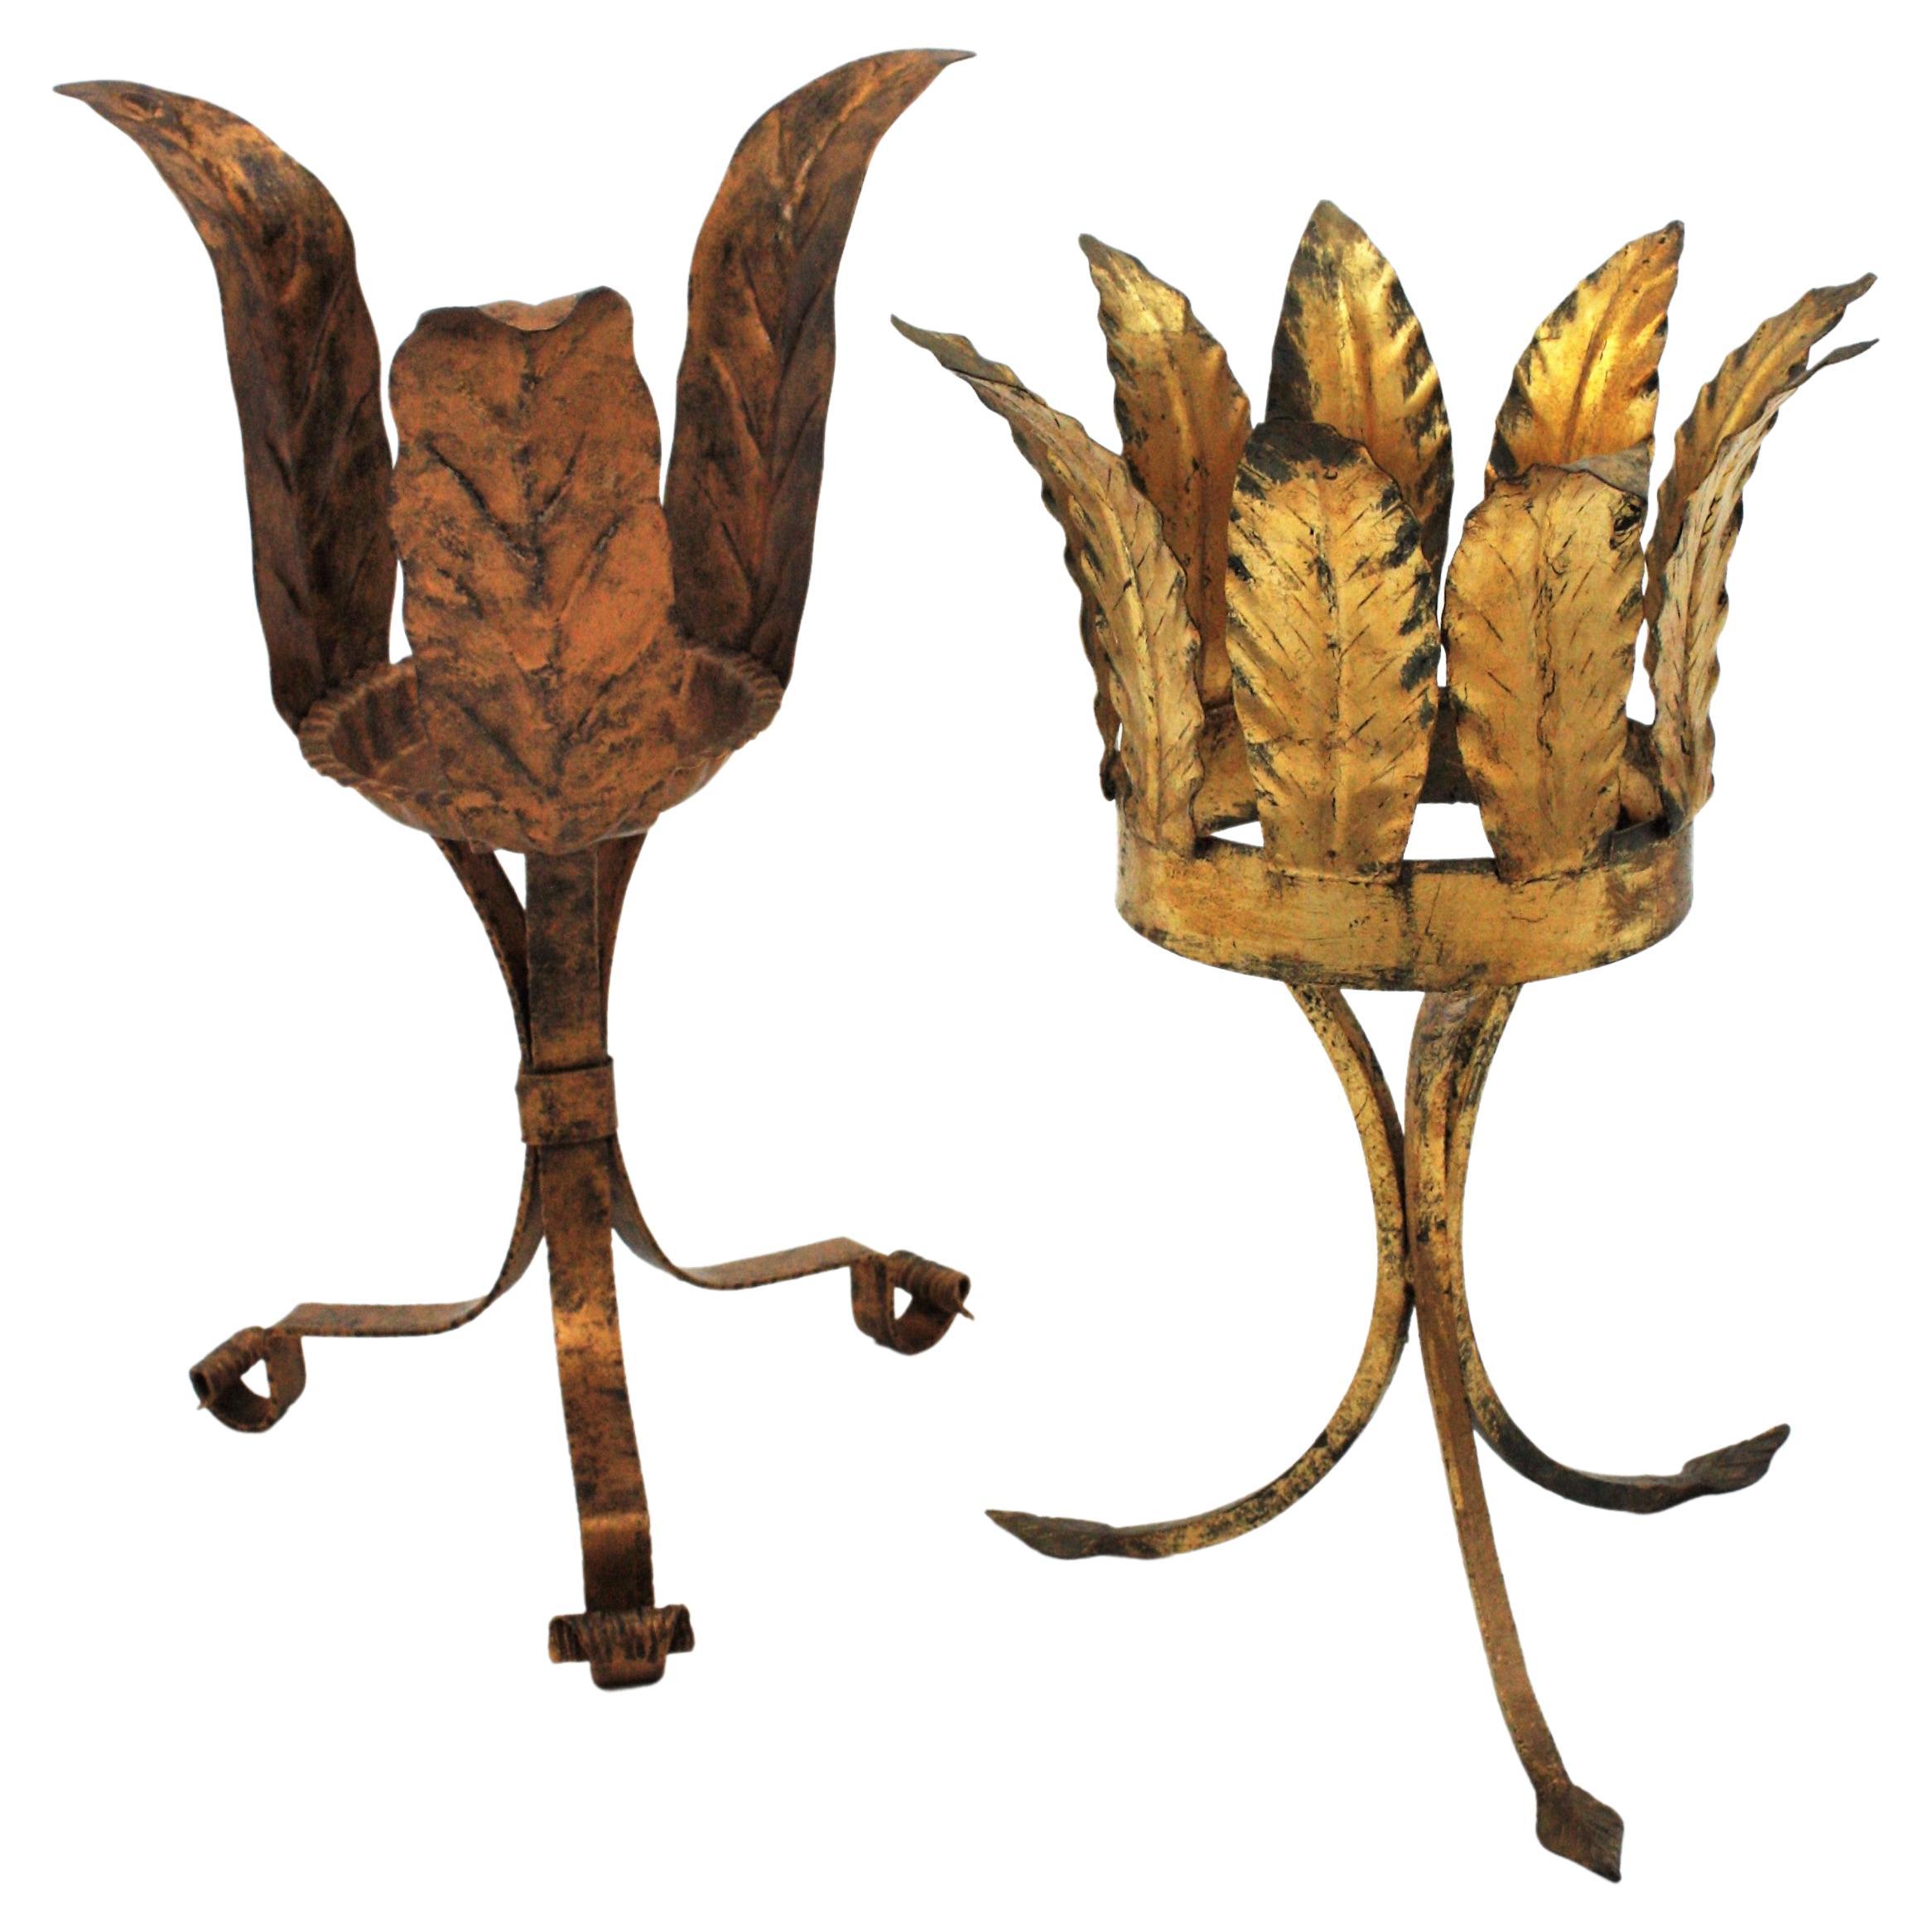 Set of two gilt wrought iron leafed planters on tripod bases. Manufactured at the Mid-Century Modern period, Spain, 1950-1960.
Both standing on tripod bases. Different design, one with a triple leafed top and the other one with leafed crown shaped